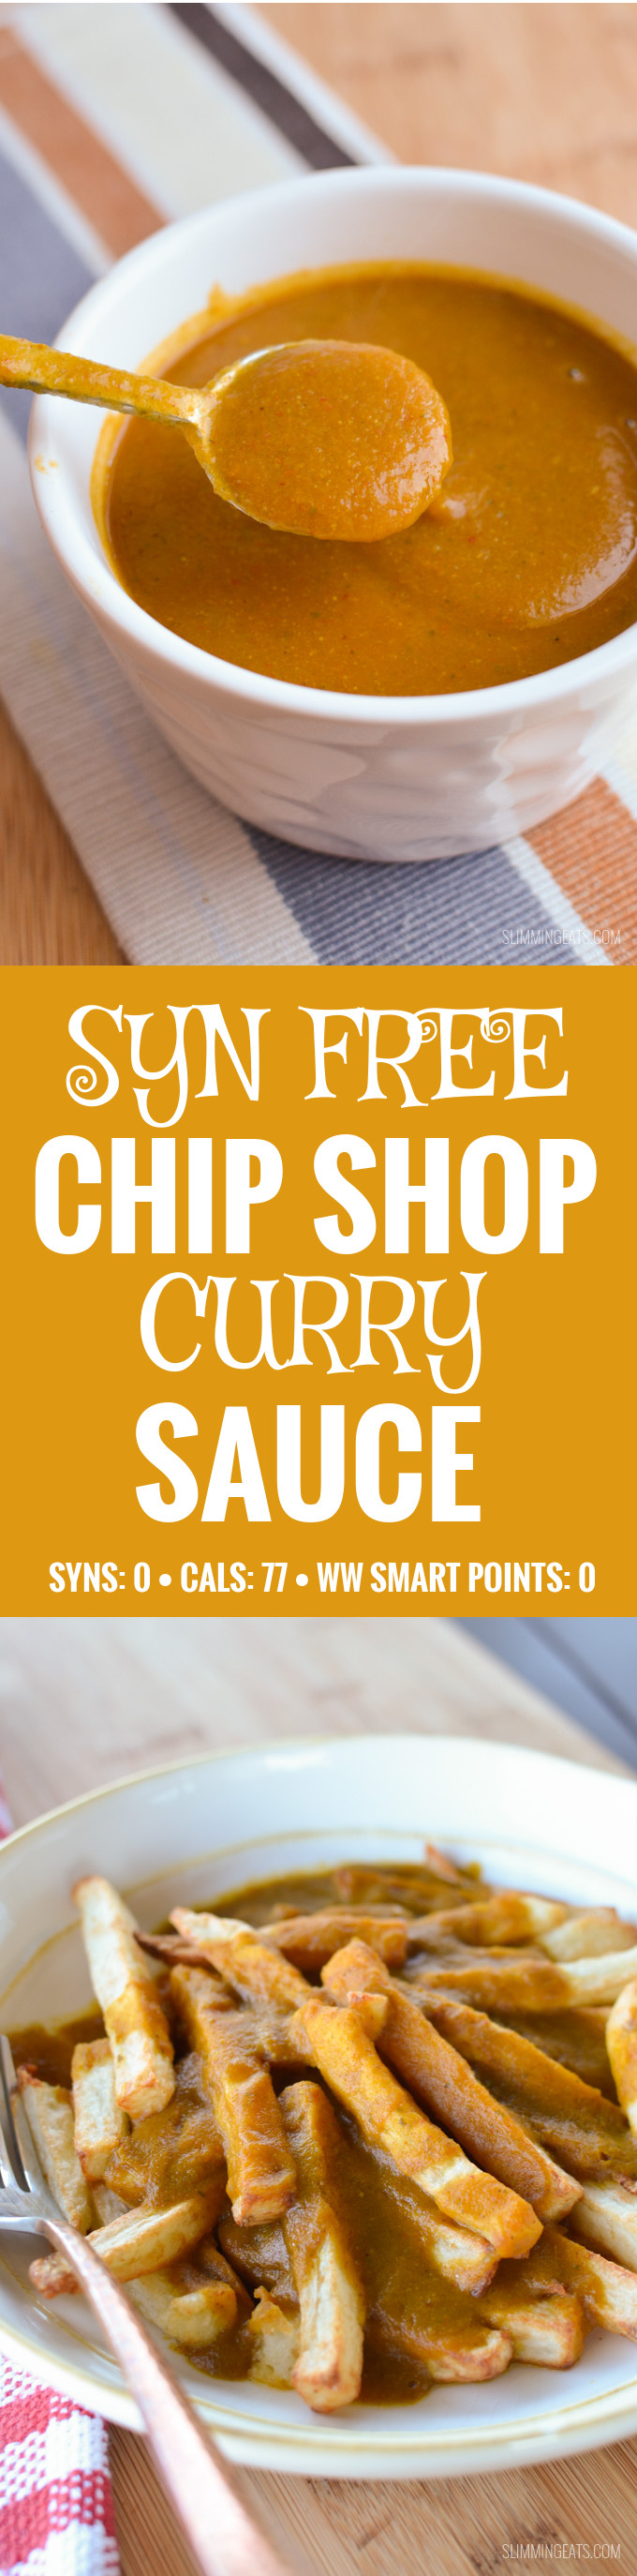 Slimming Eats Syn Free Chip Shop Curry Sauce - gluten free, dairy free, vegetarian, paleo, Whole30, Slimming World, Weight Watchers, friendly